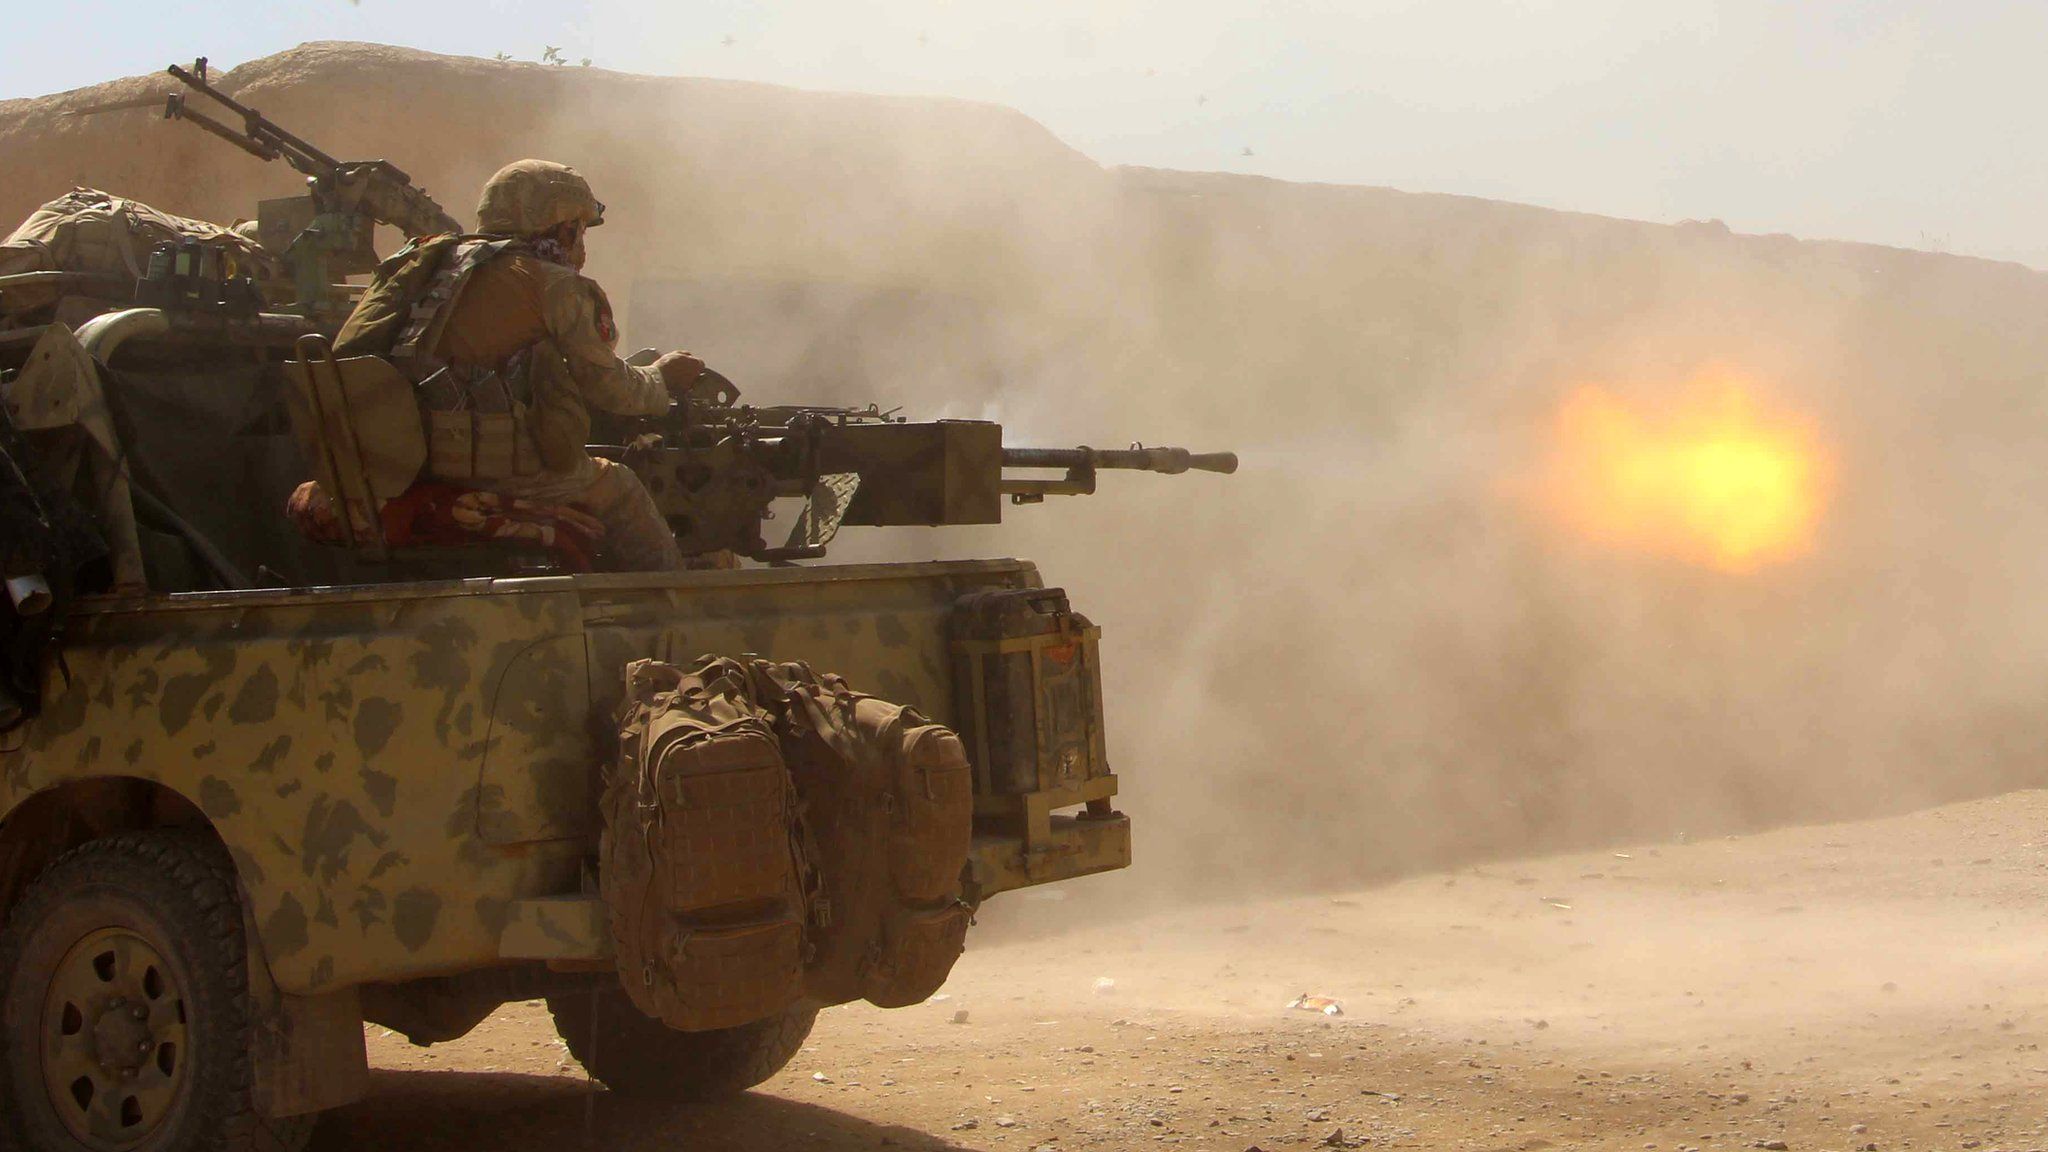 The Afghan National Army opens fire on a Taliban position during a military operation in Helmand province, 9 October 2016